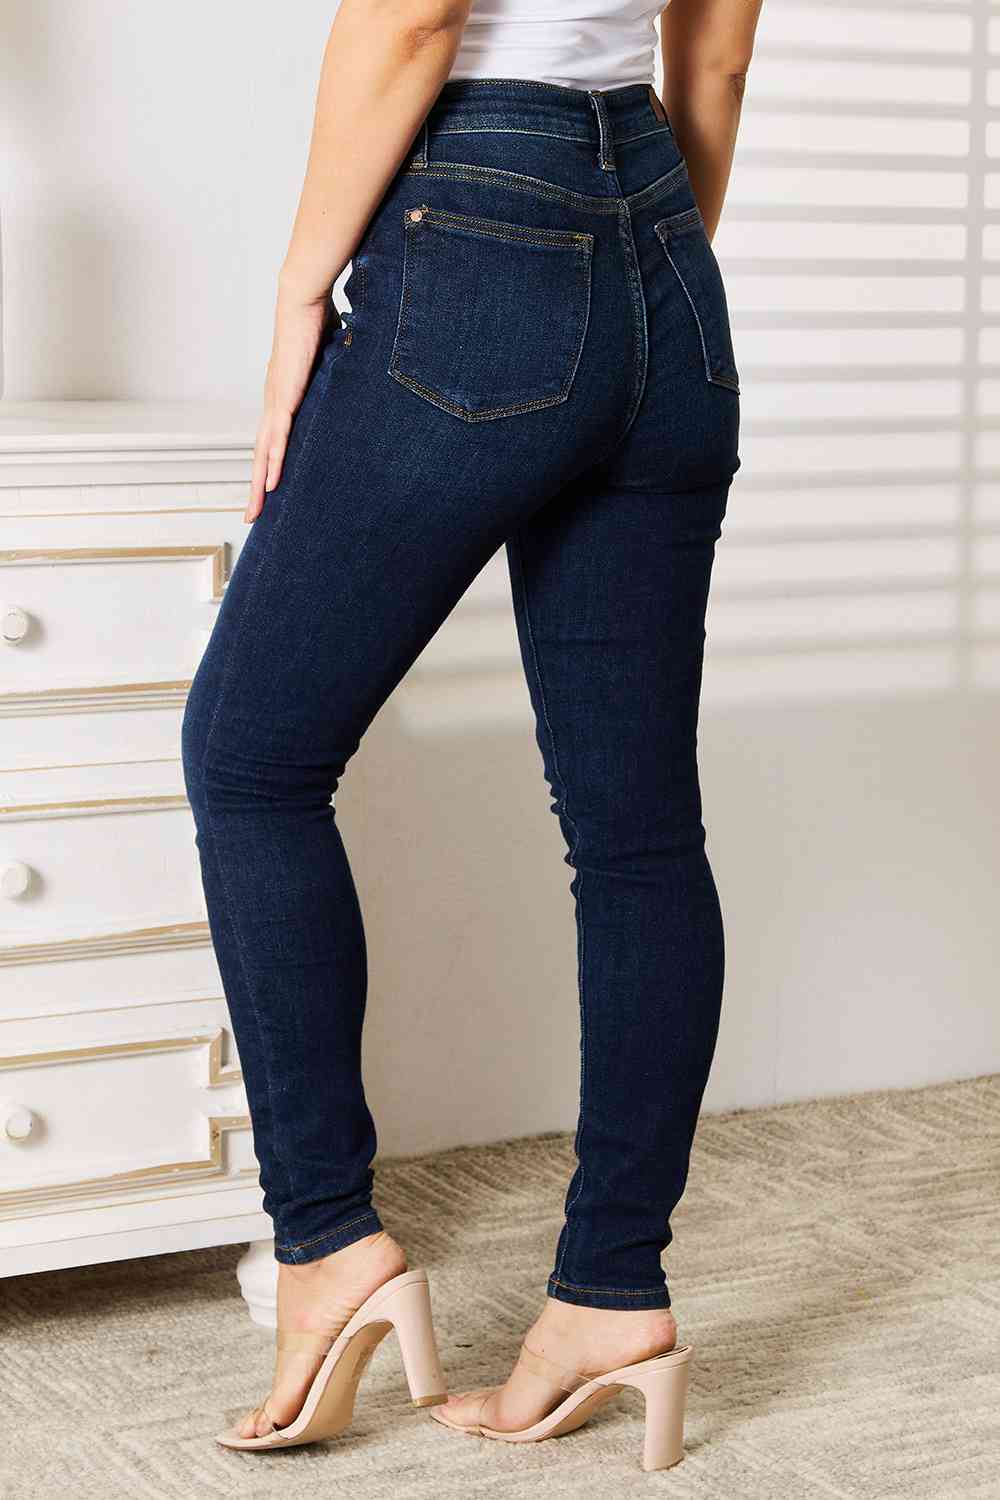 Back View, Judy Blue, High-Rise Handsand Skinny Jeans Style 82553